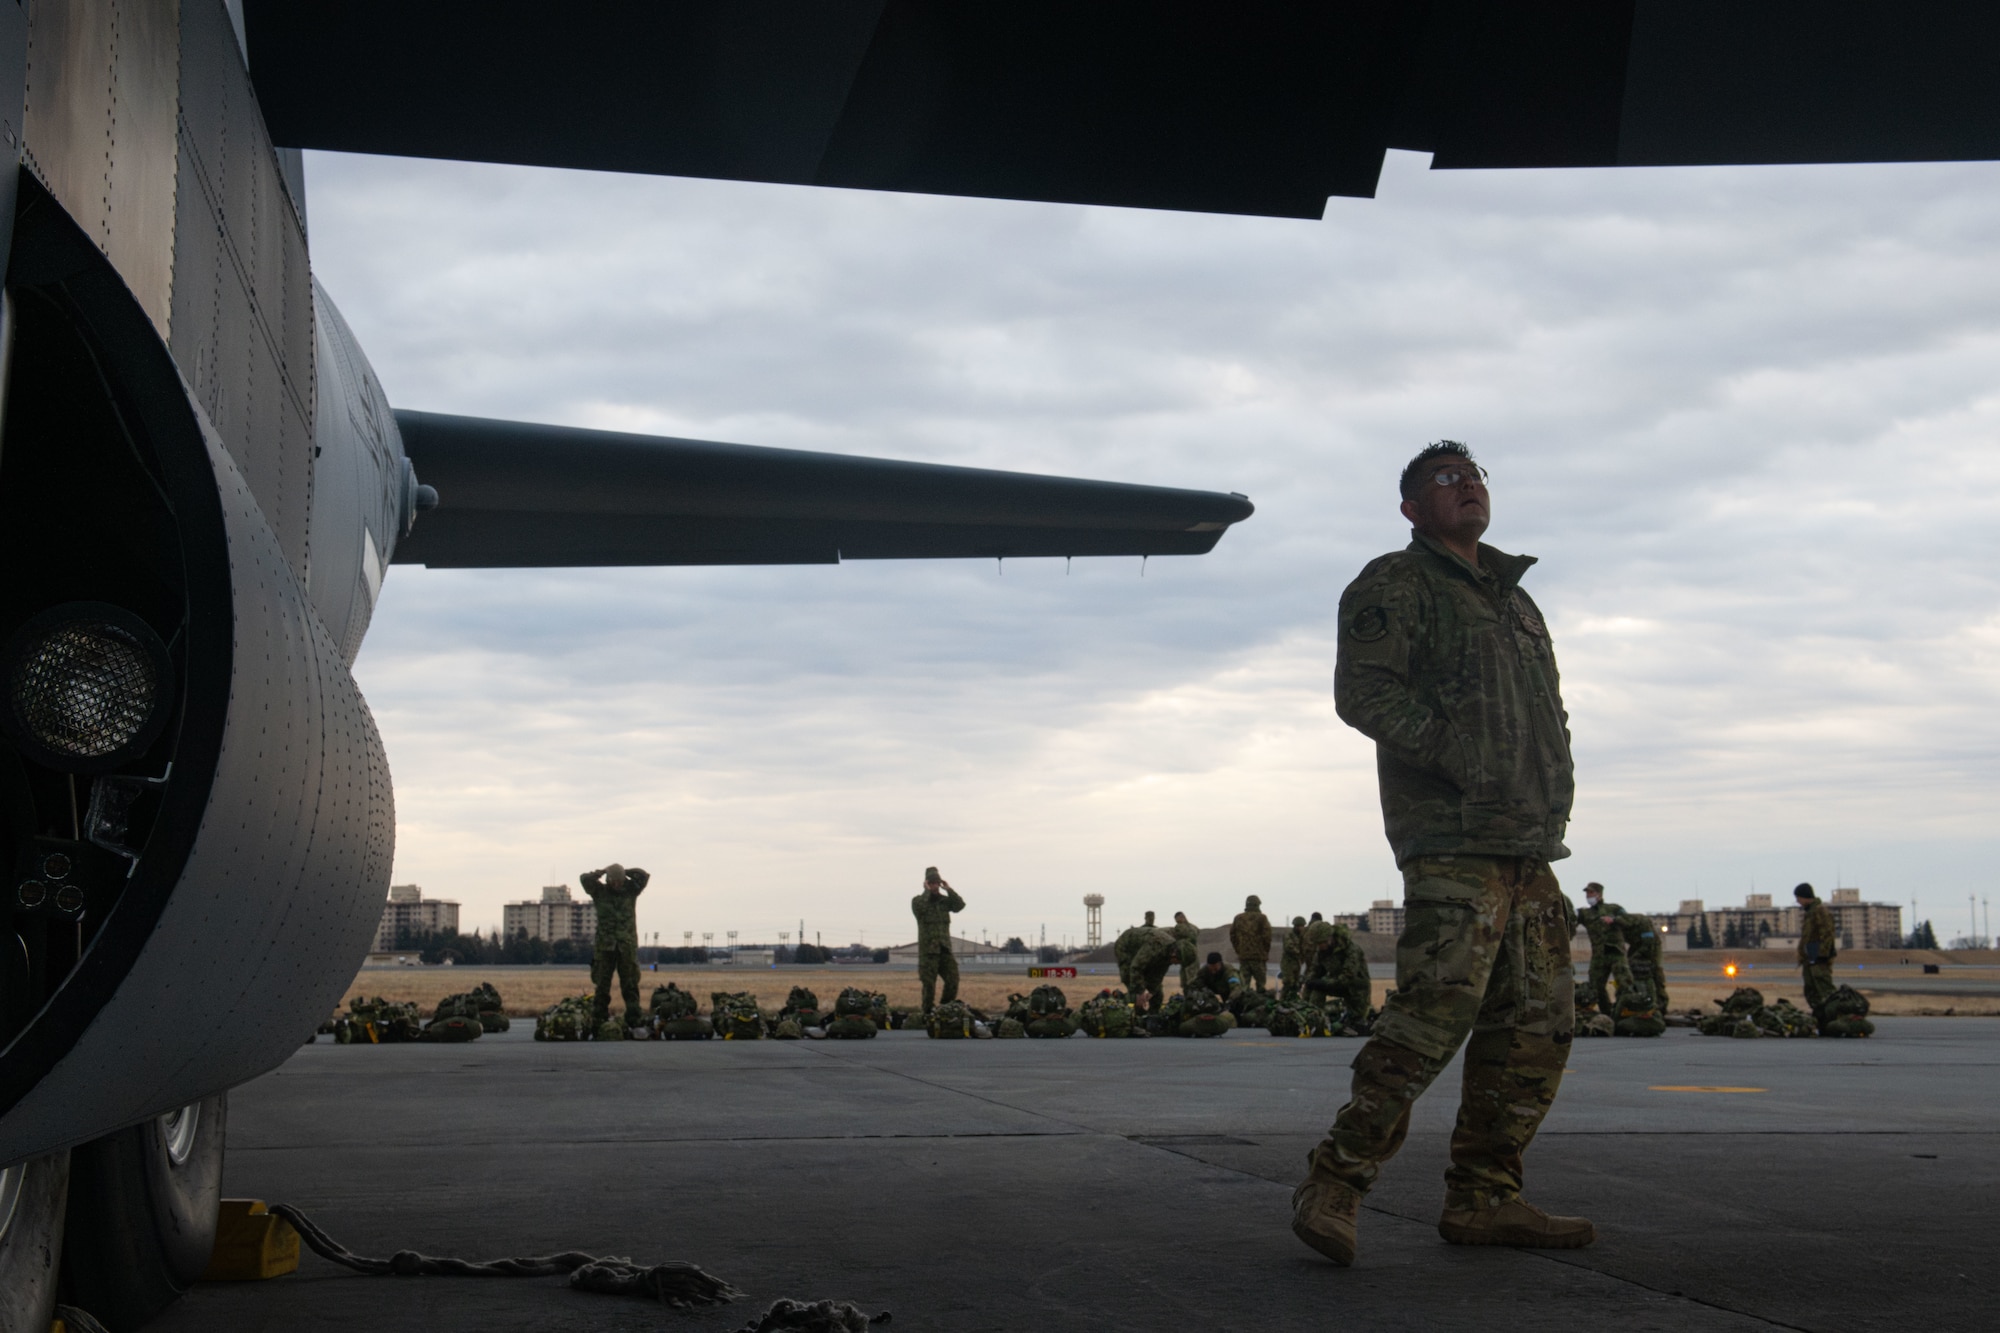 A loadmaster performs a pre-flight inspection on a C-130J during Airborne 24.